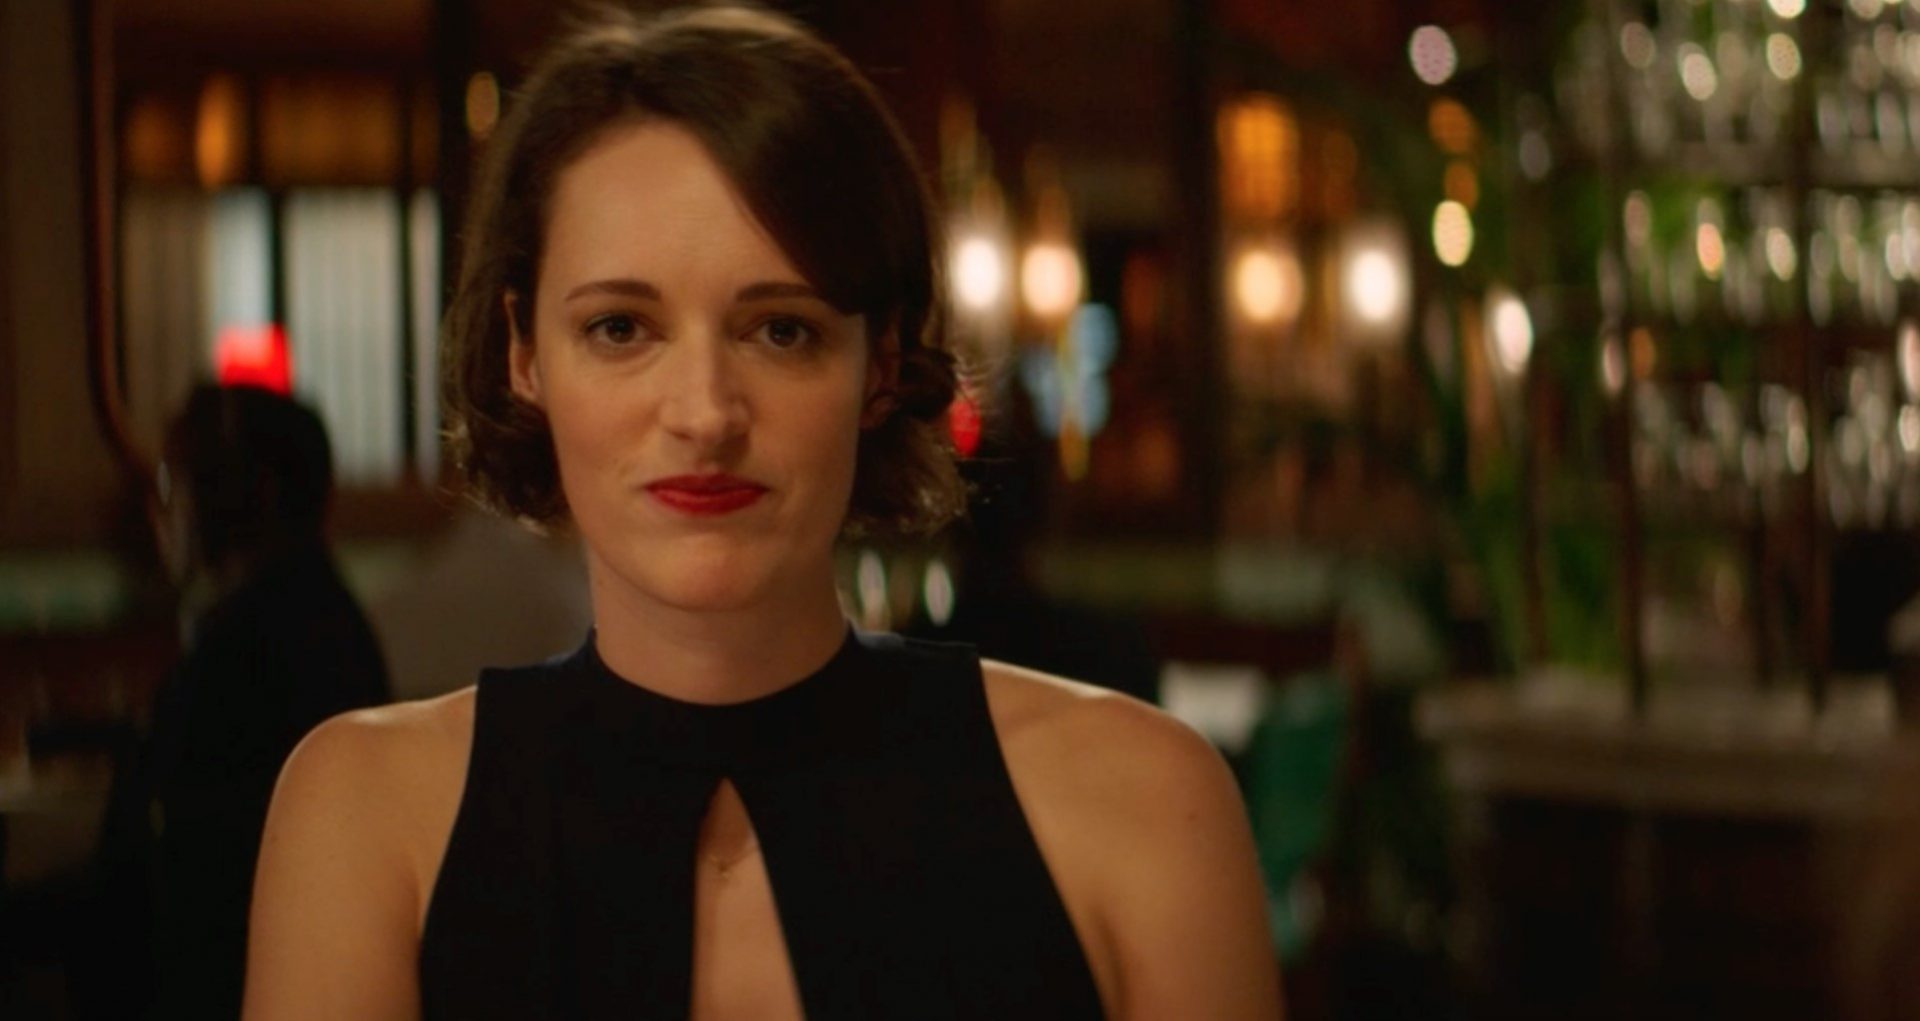 Phoebe Waller-Bridge Is Making Millions By Doing Nothing Thanks To Amazon